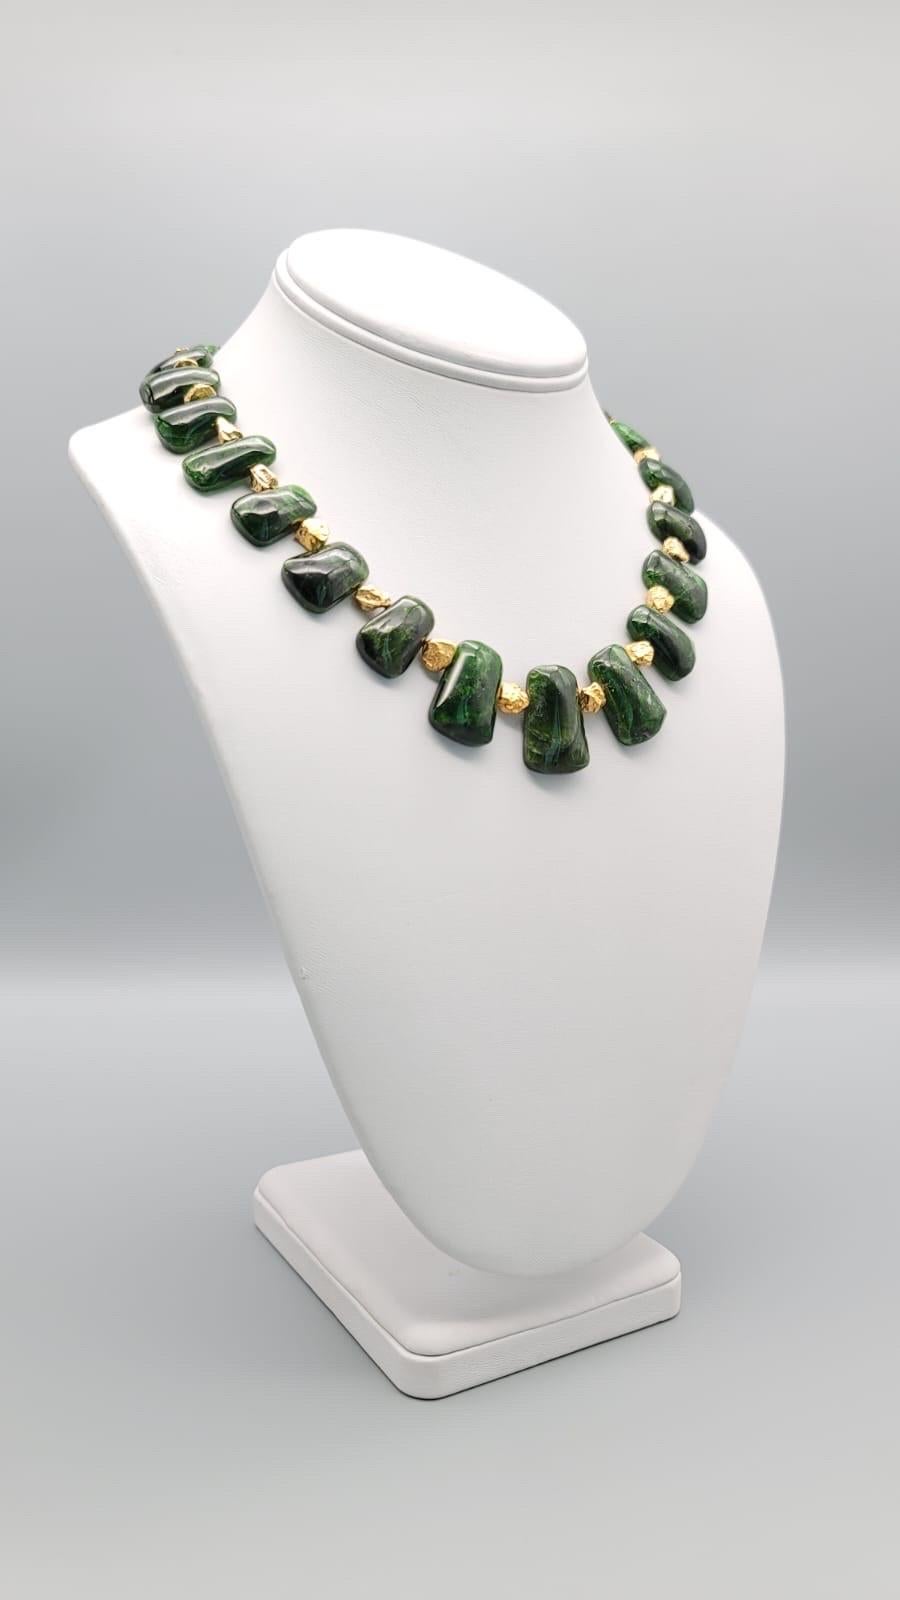 A.Jeschel Richly colored Chrome Diopside necklace 10